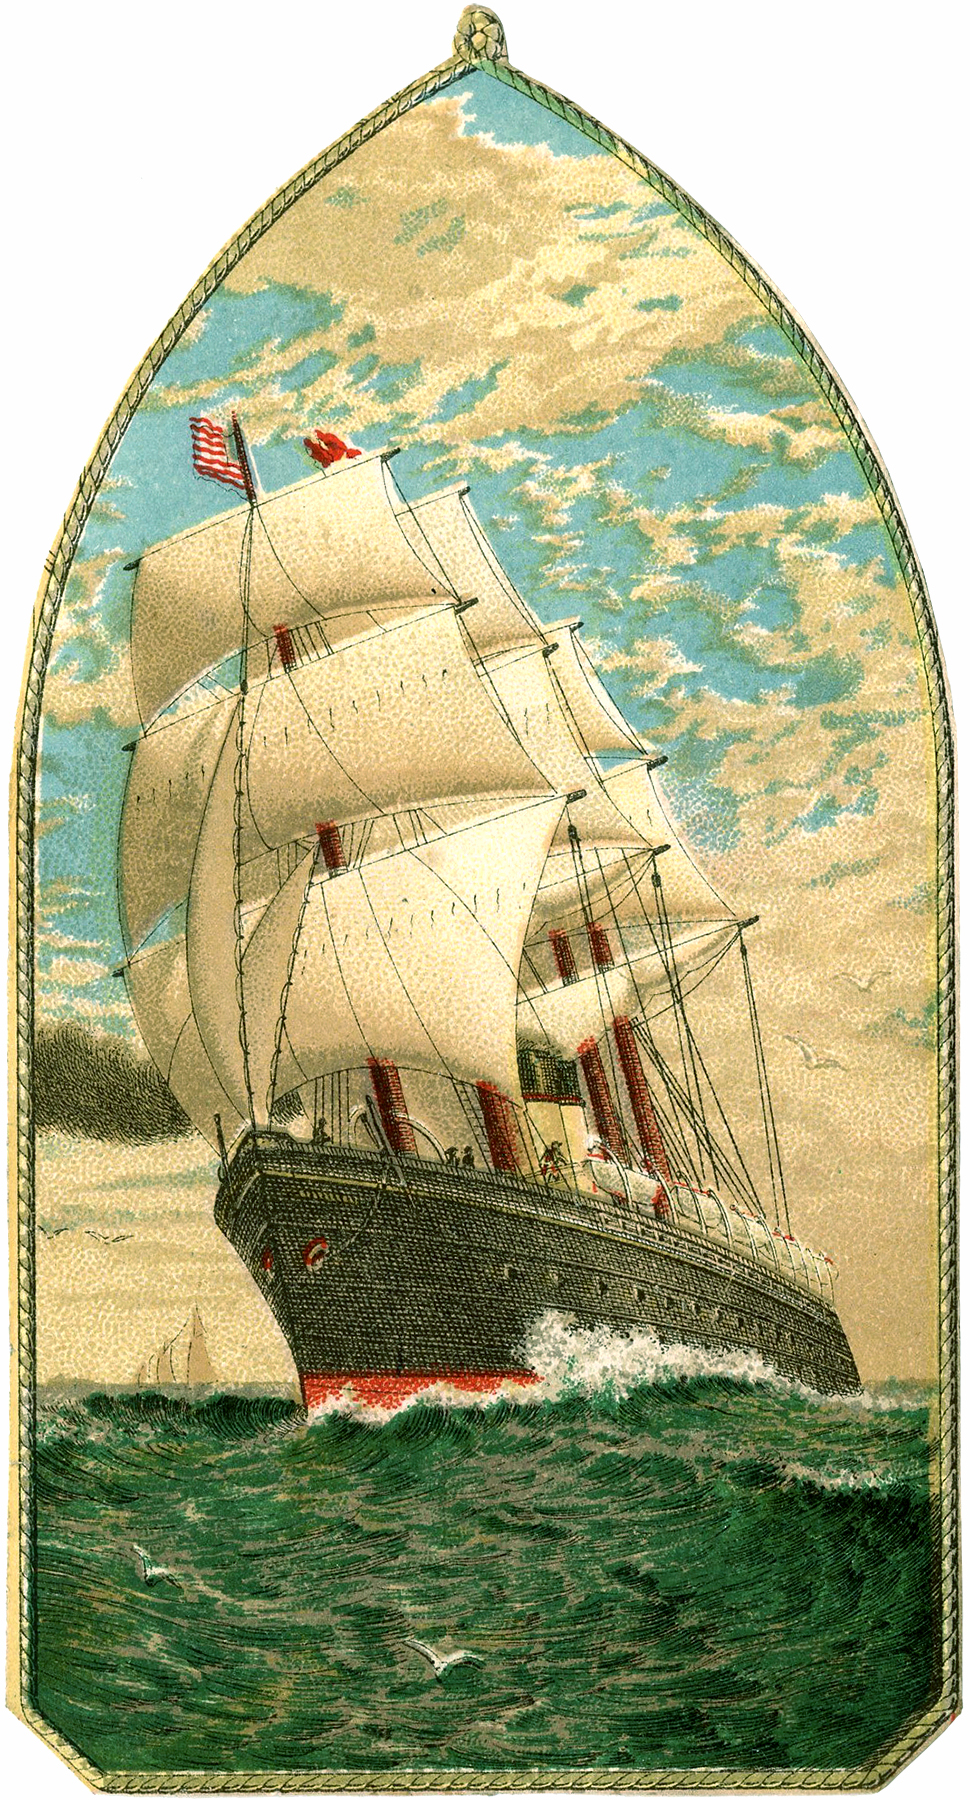 Vintage Ship Stock Image! - The Graphics Fairy